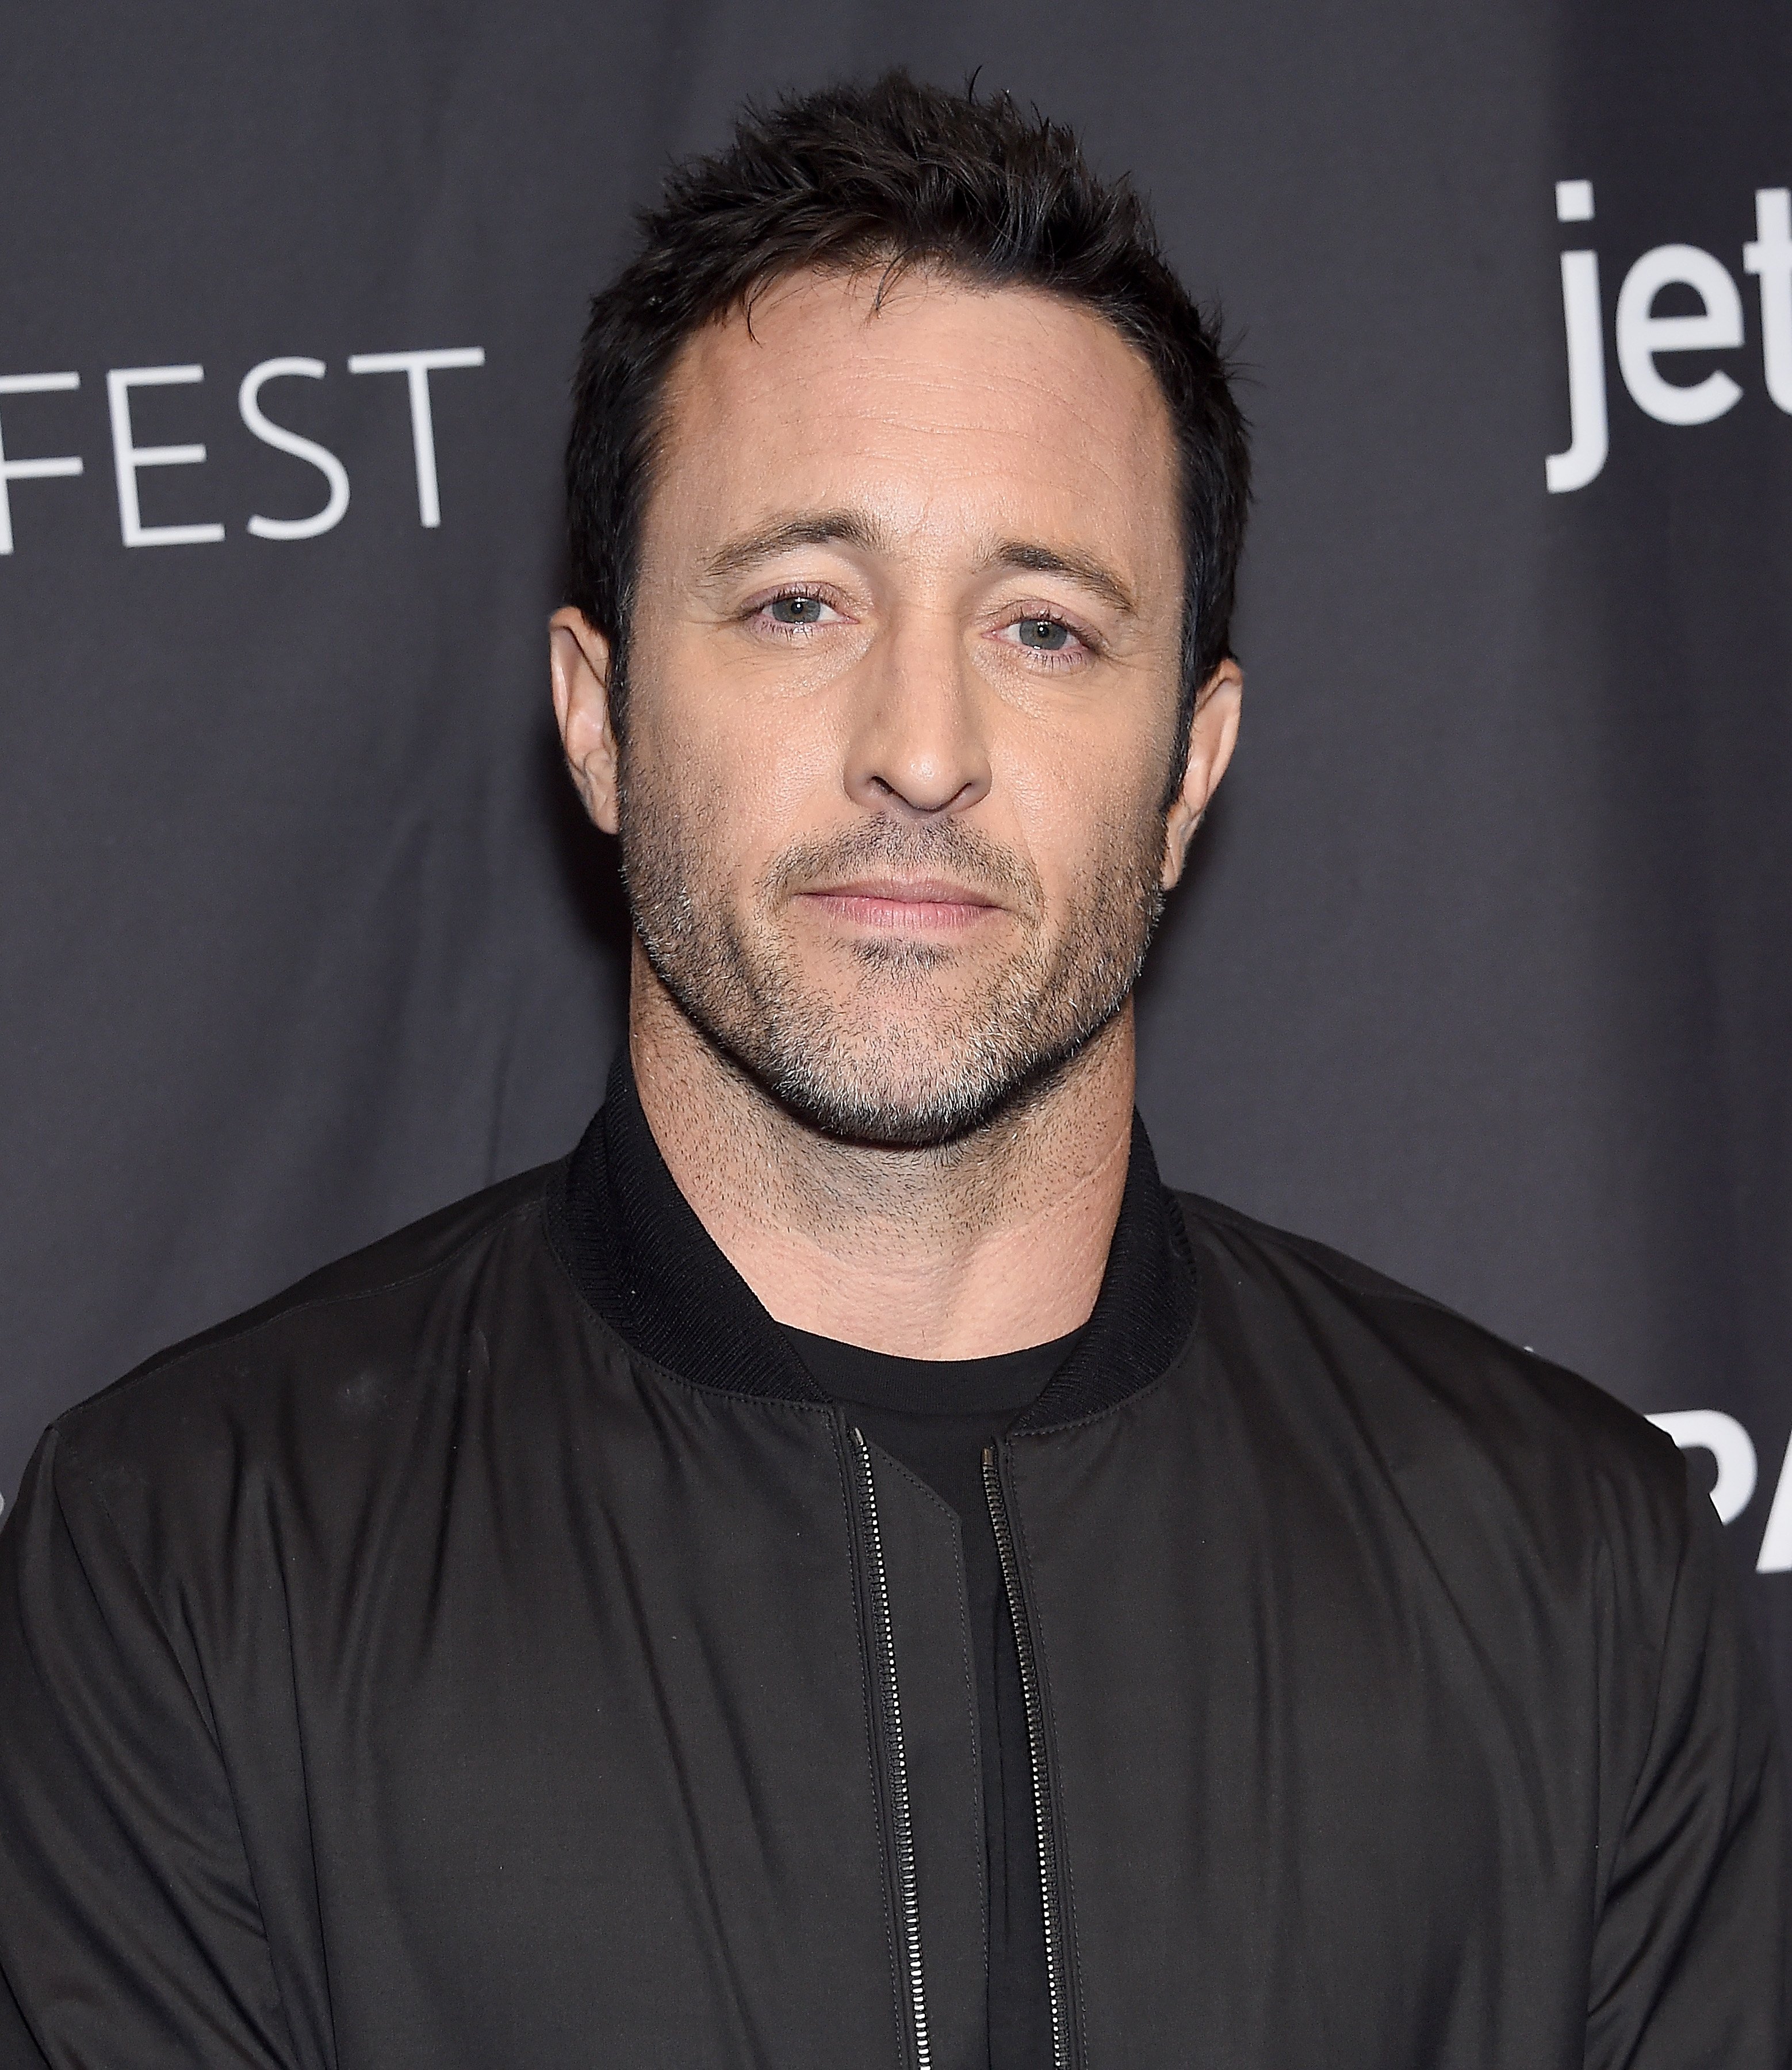 Alex O'Loughlin at PaleyFest LA on March 23, 2019, in California. | Source: Getty Images